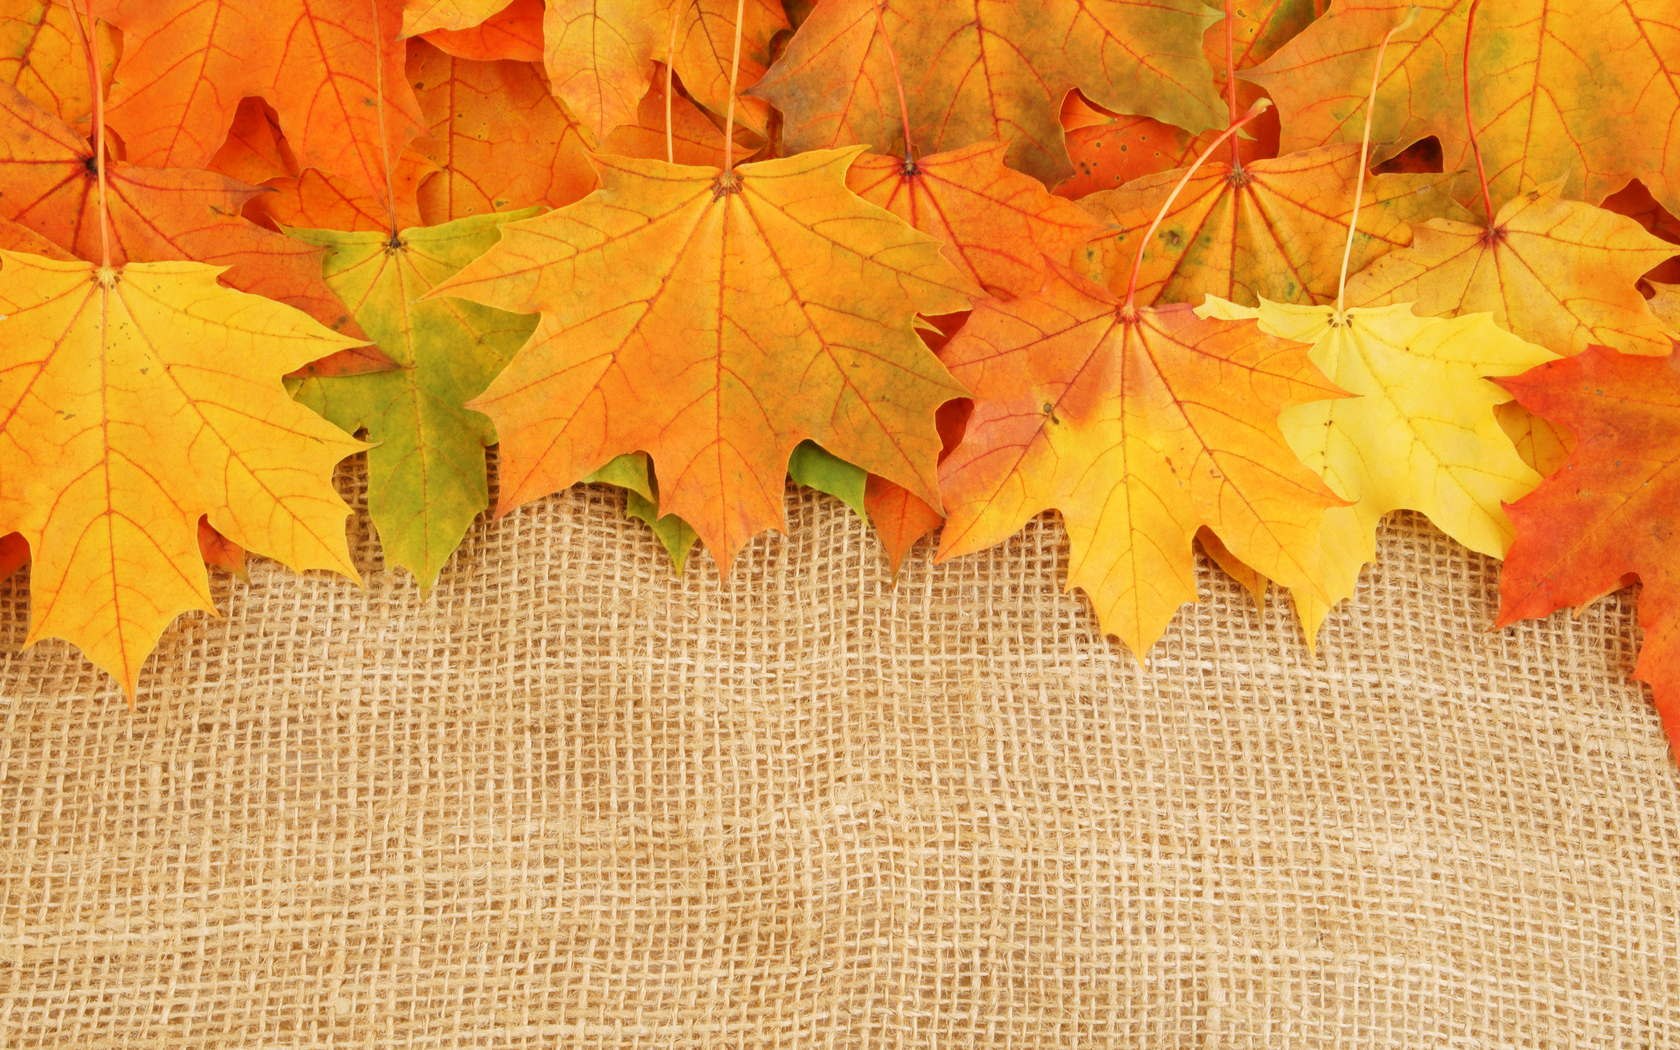  autumn leaves textures download photo background background autumn